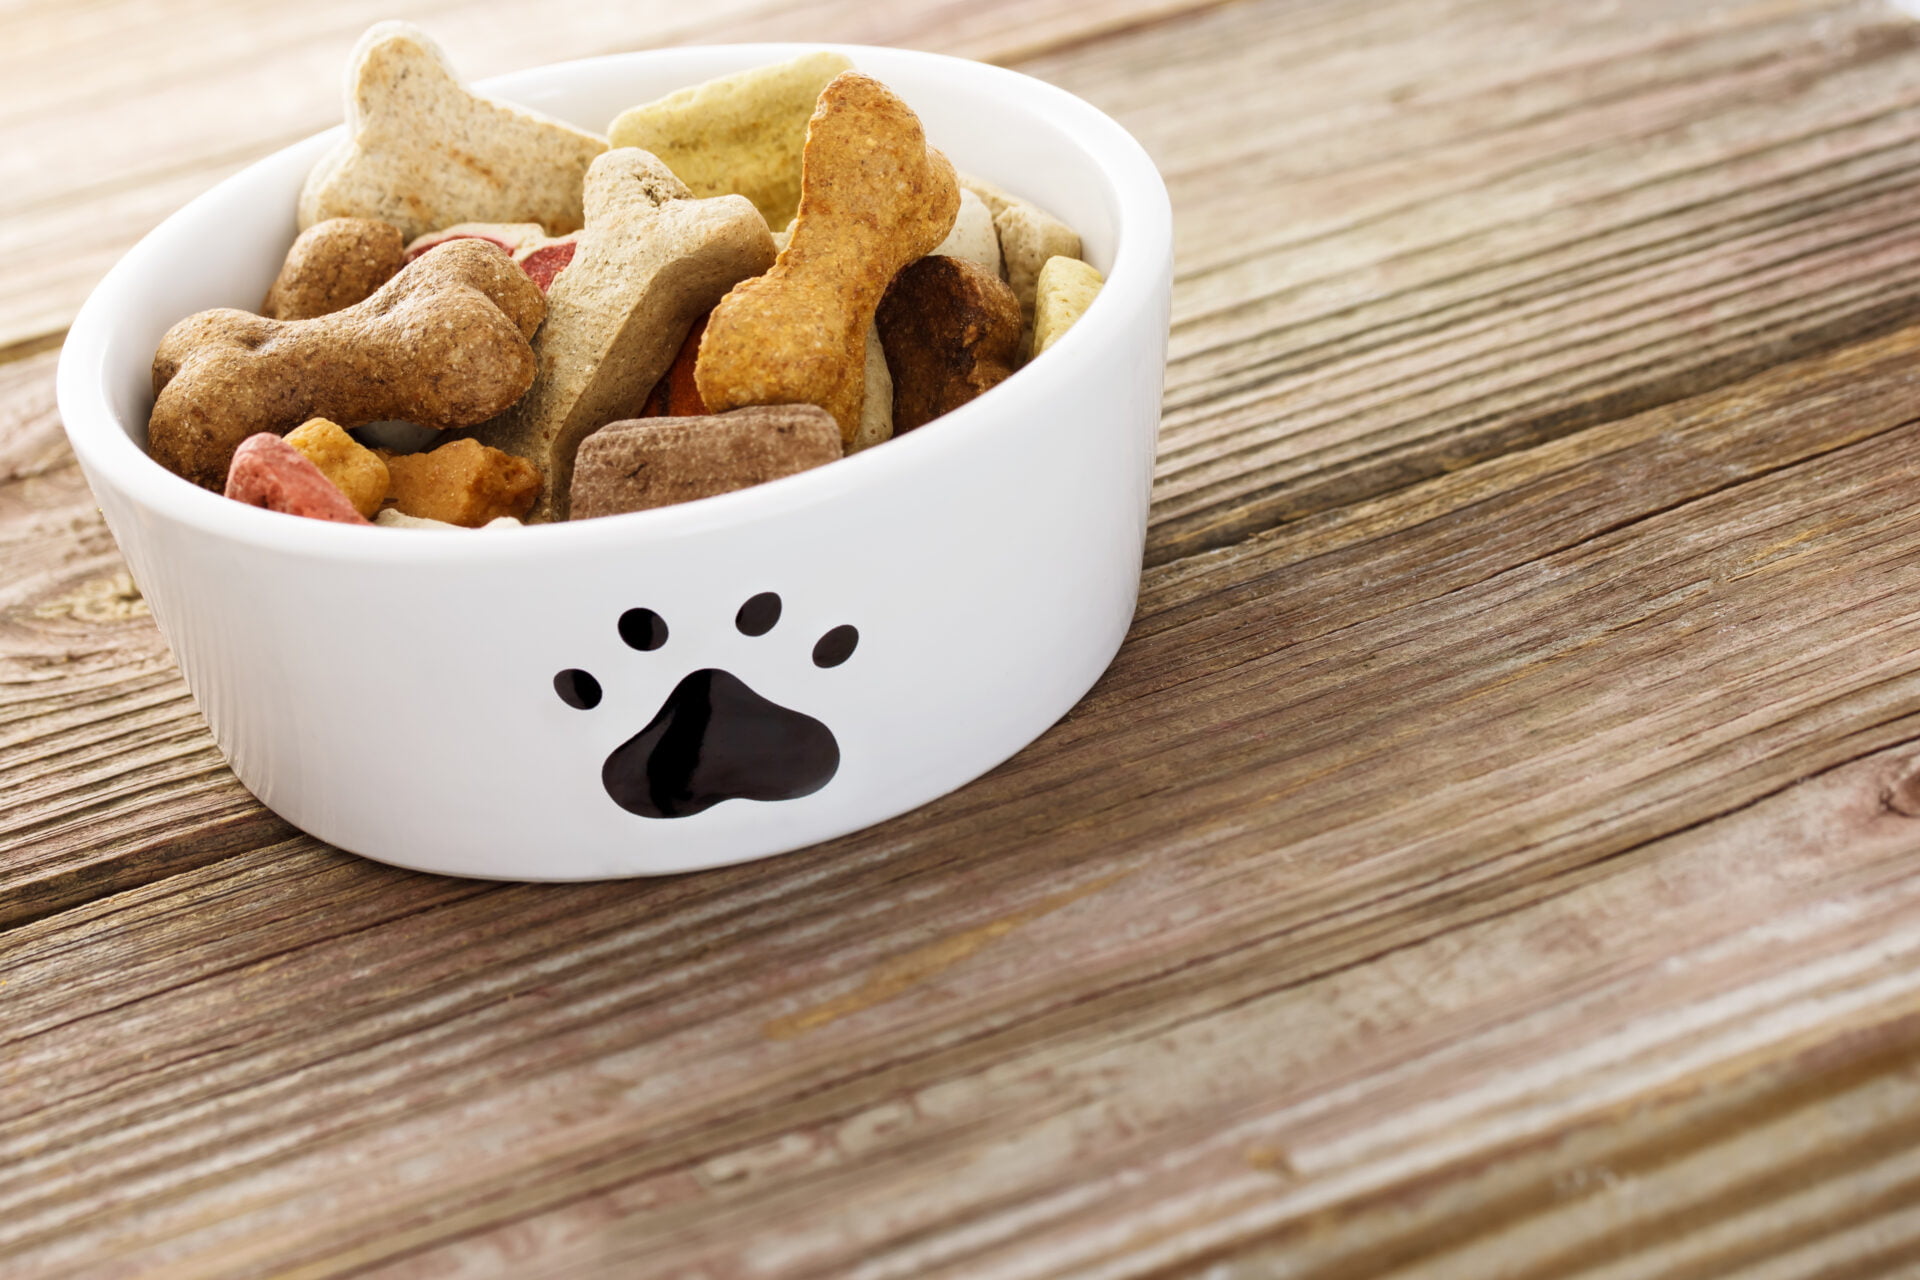 Natural organic non-toxic Dog food in a bowl on wooden table